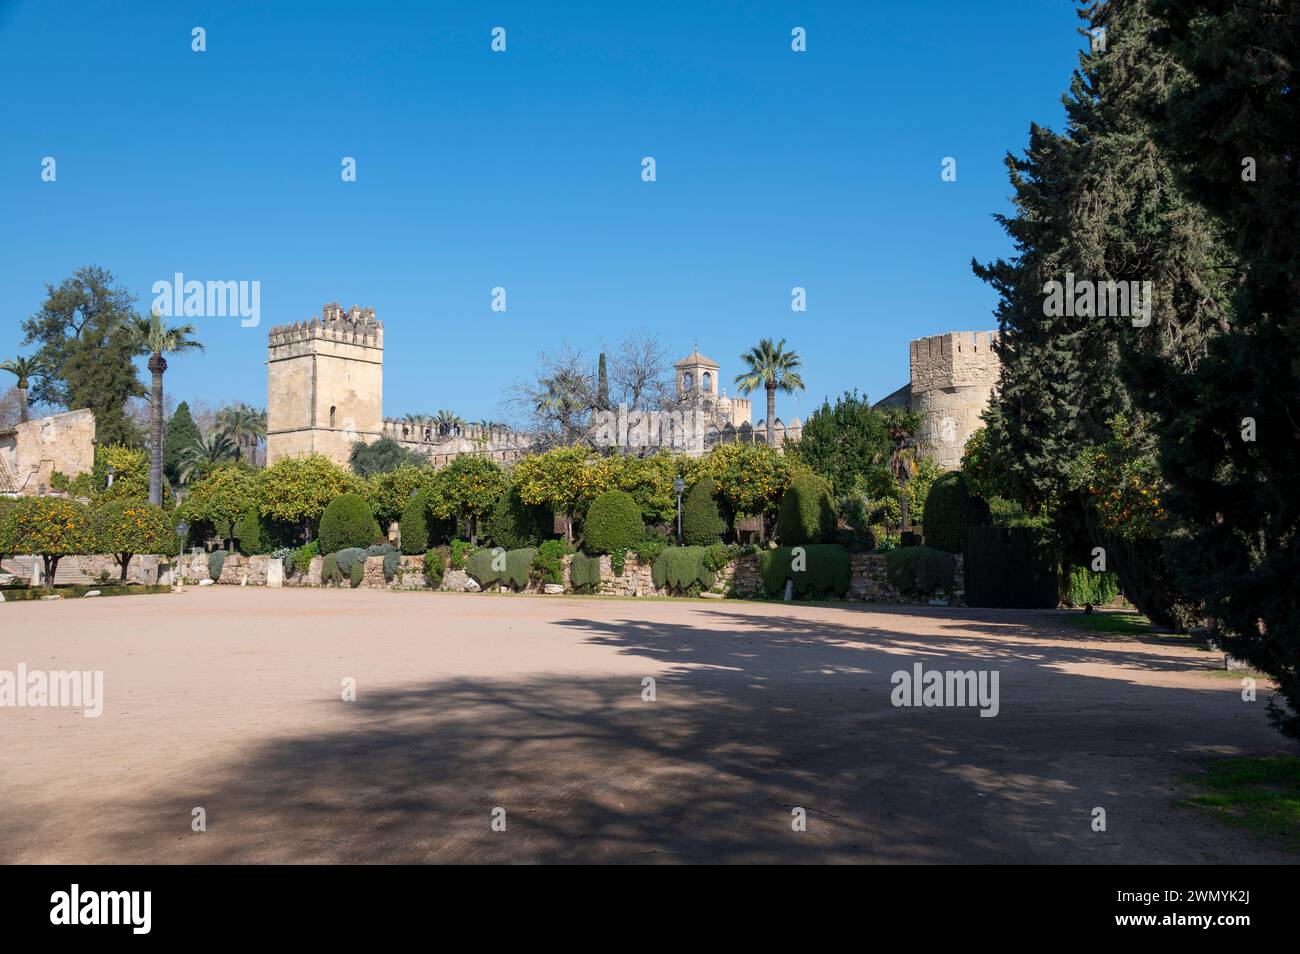 From the gardens towards the Alcazar de los Reyes Cristianos, also known as the Alcazar of Cordoba, is a medieval palace/ fortress in the historic cen Stock Photo